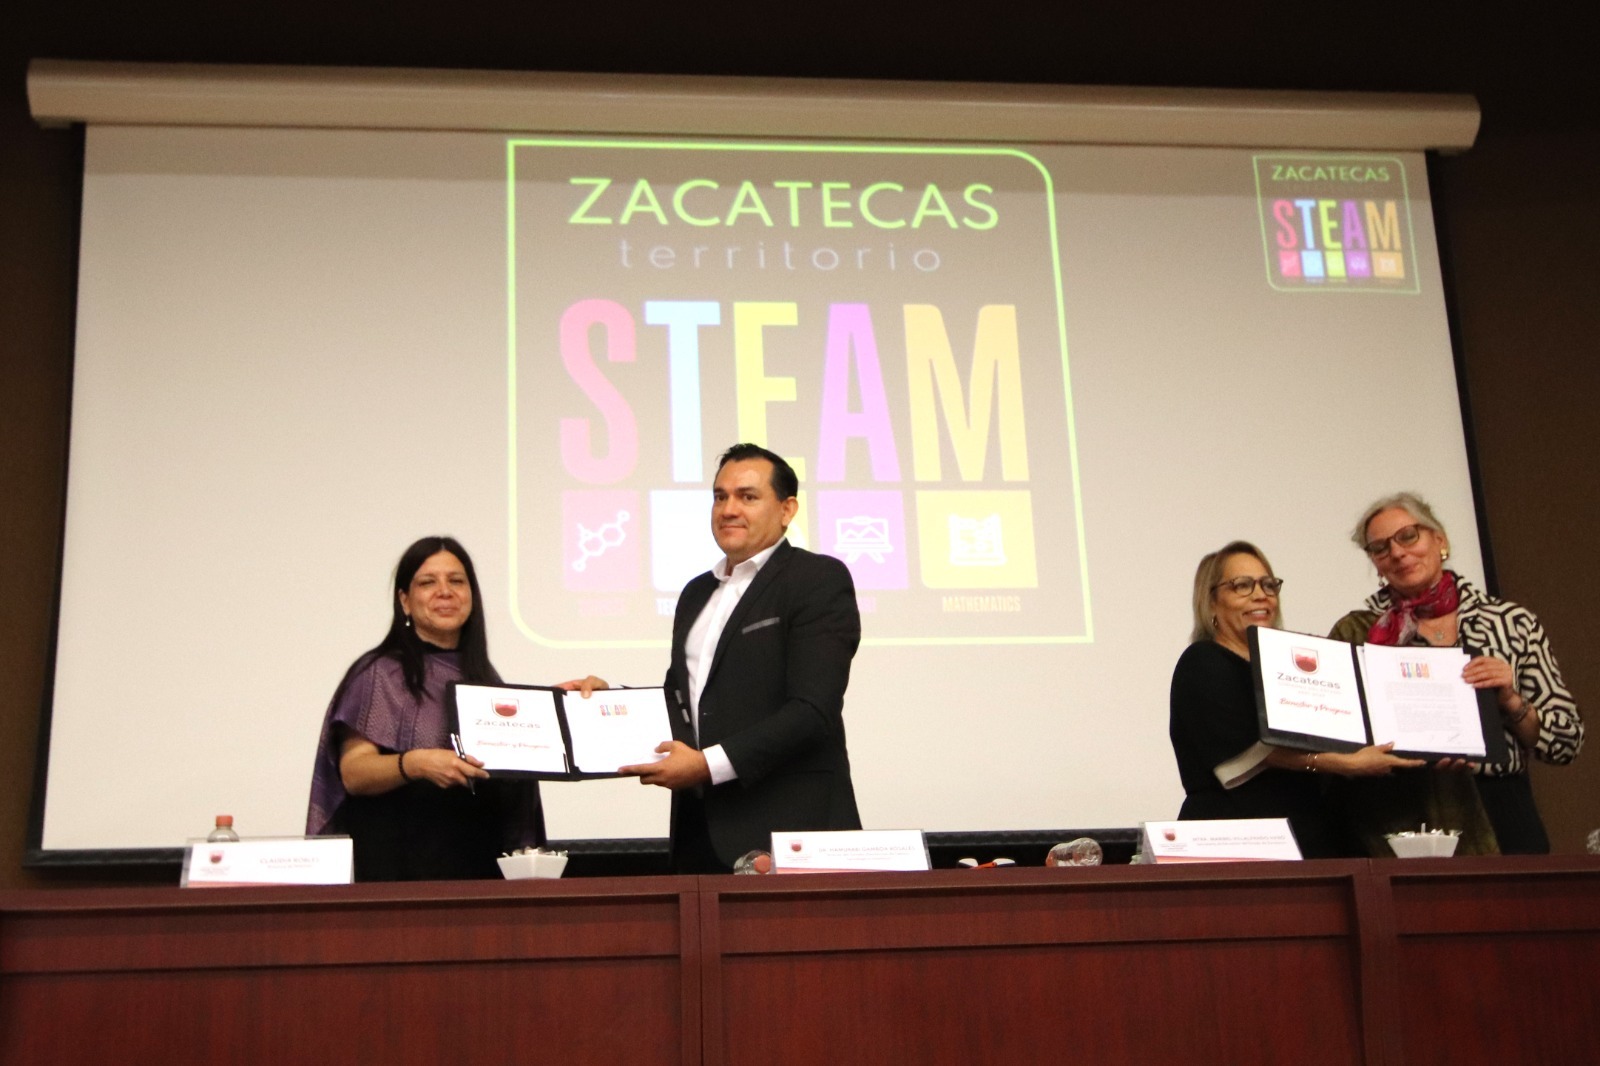 Zacatecas has been declared a STEM Territory – Zacatecas State Government